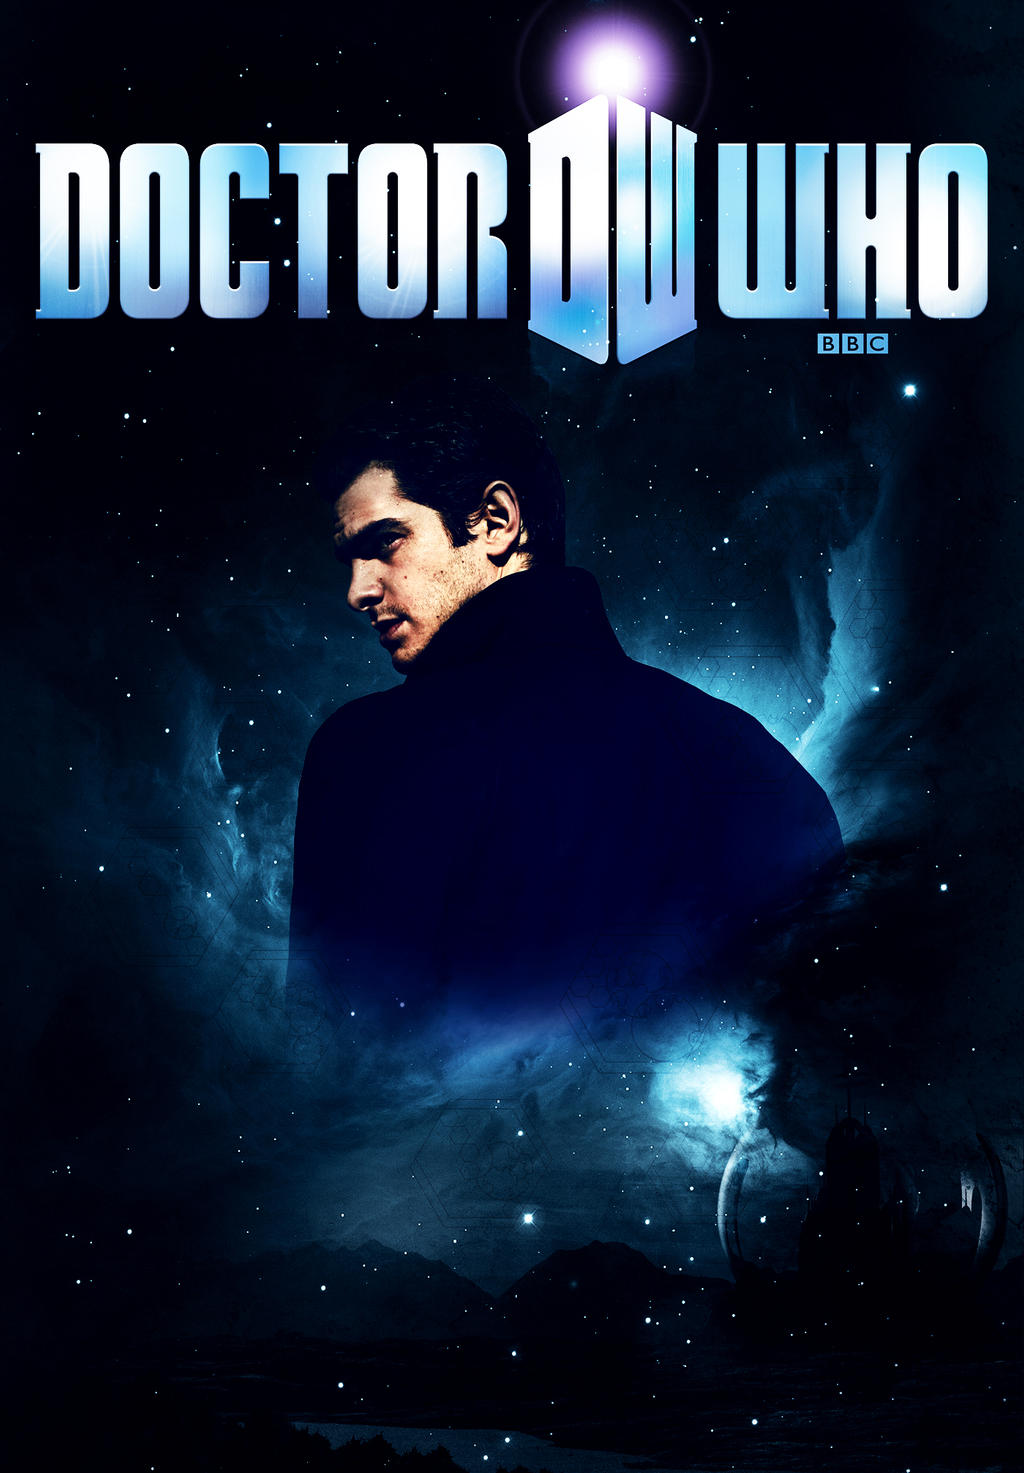 Andrew Garfield as Doctor Who